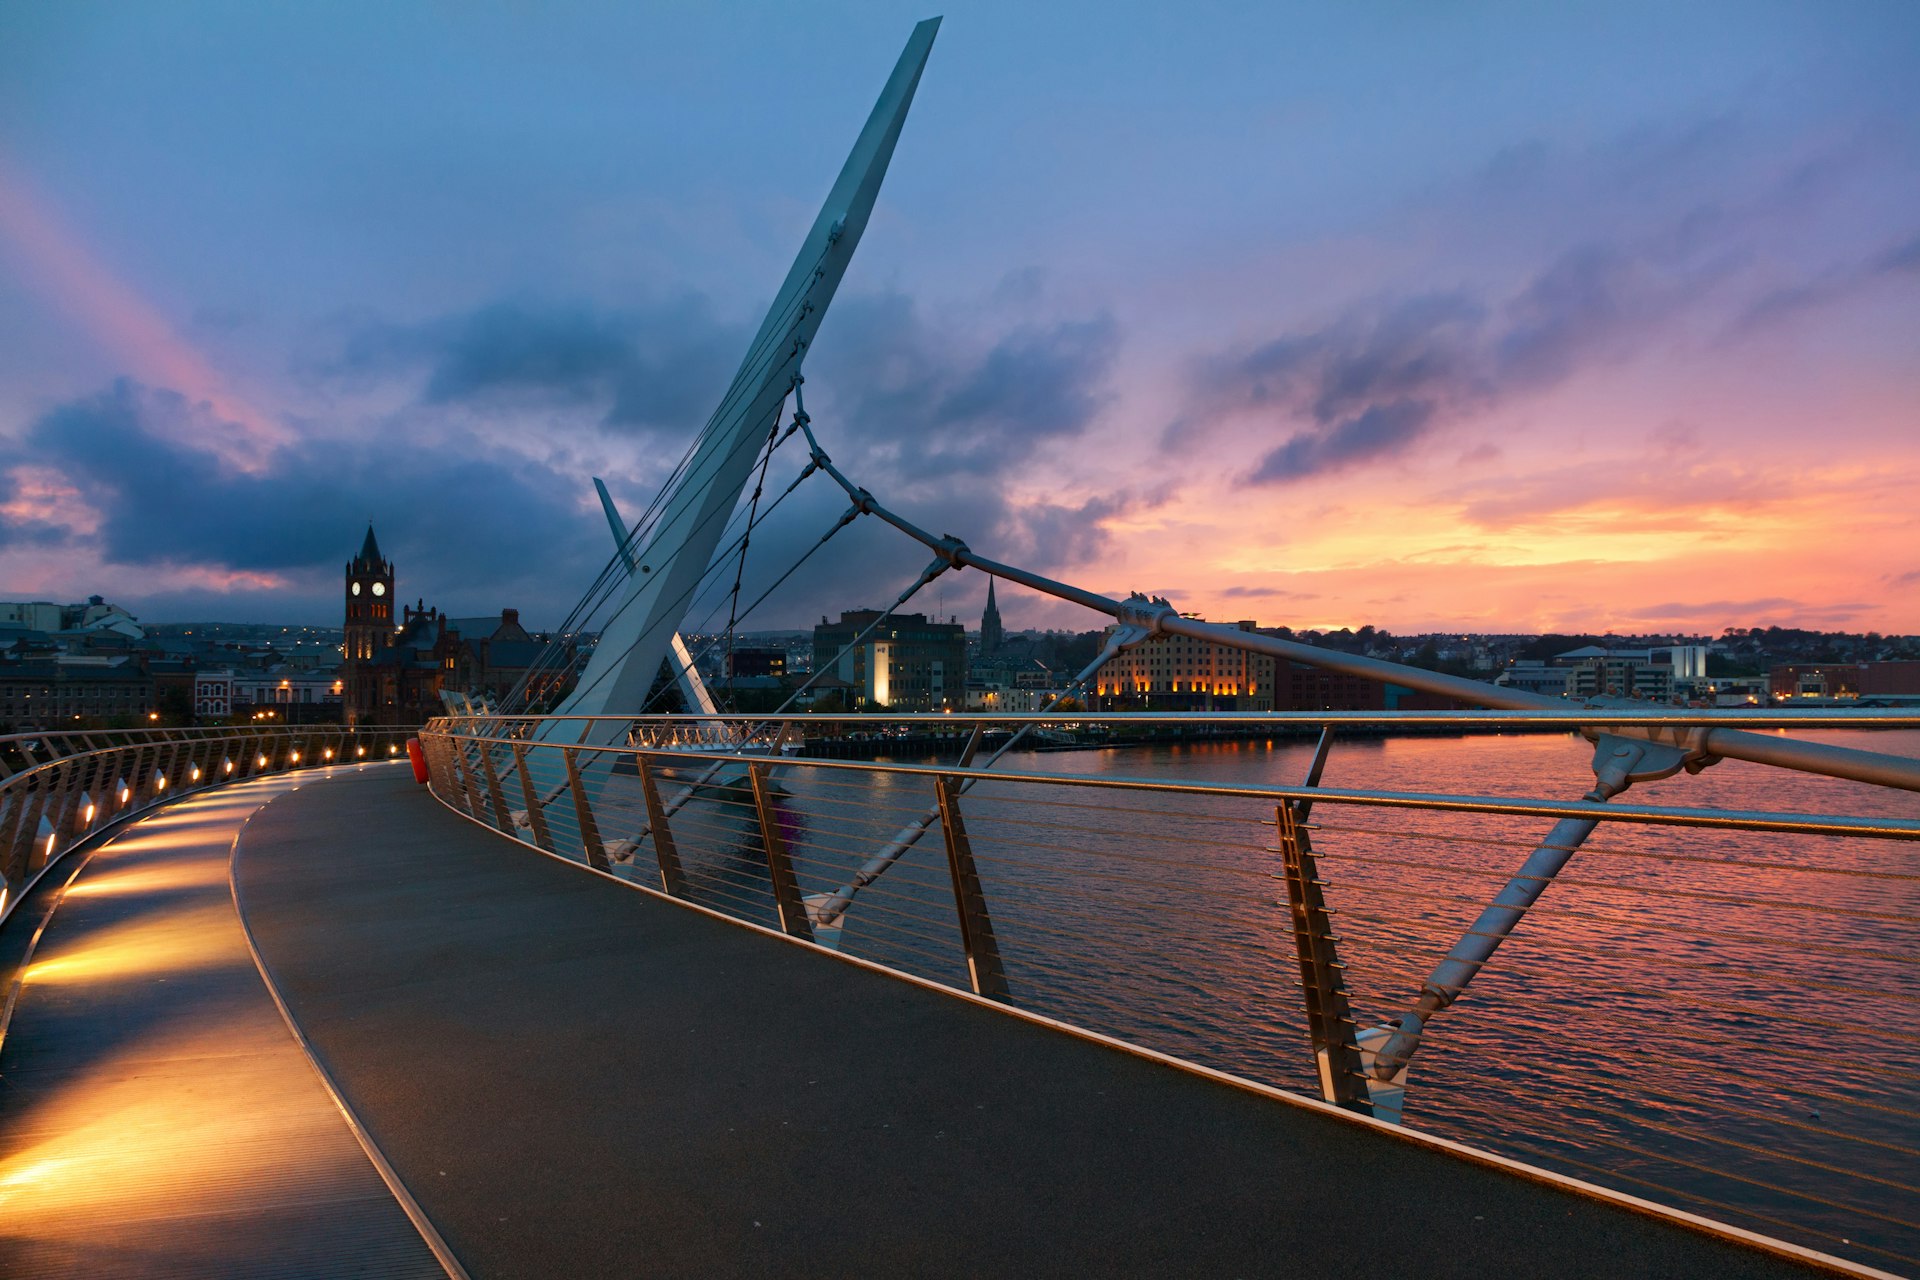 Sunset over Derry's Peace Bridge. Image by Andrea Ricordi, Italy / Getty